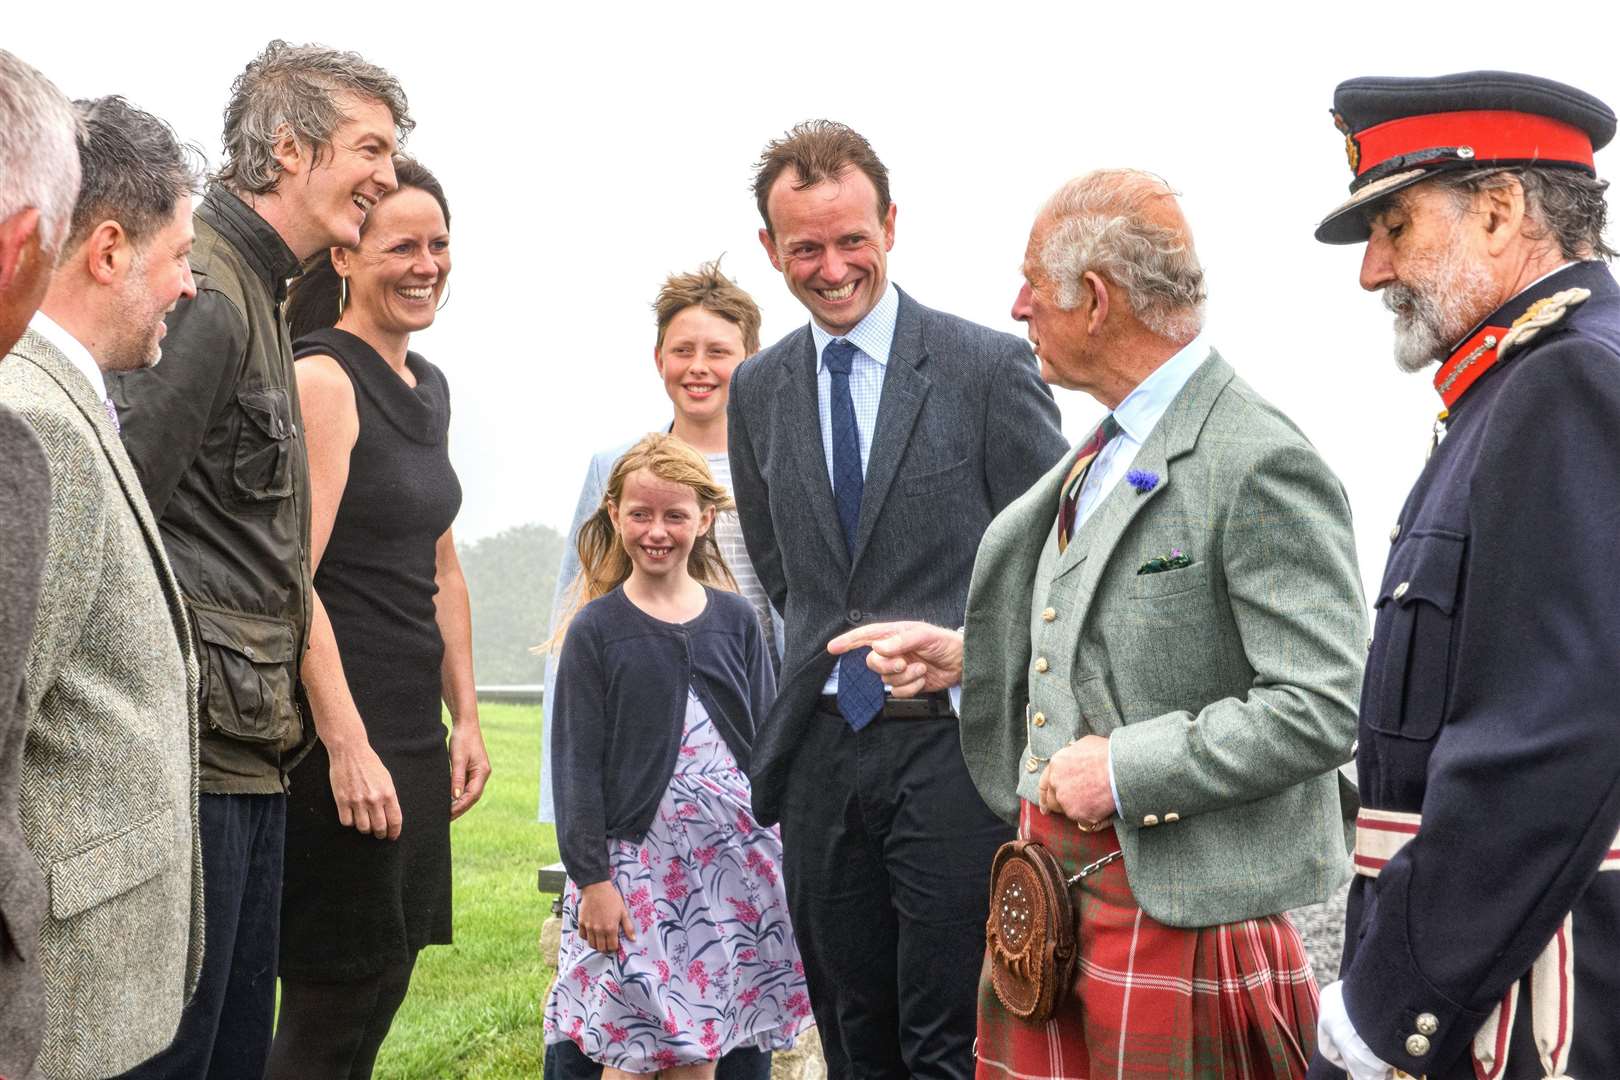 A light-hearted moment during the royal tour last Thursday. From left, Iain Levens at edge of picture, Adrian Ionescu, Ed Nassau Lake, Chloë Dunnett, Phoebe and Oliver Dunnett with their father George, HRH Prince Charles and Lord Thurso. Picture: Angus Mackay